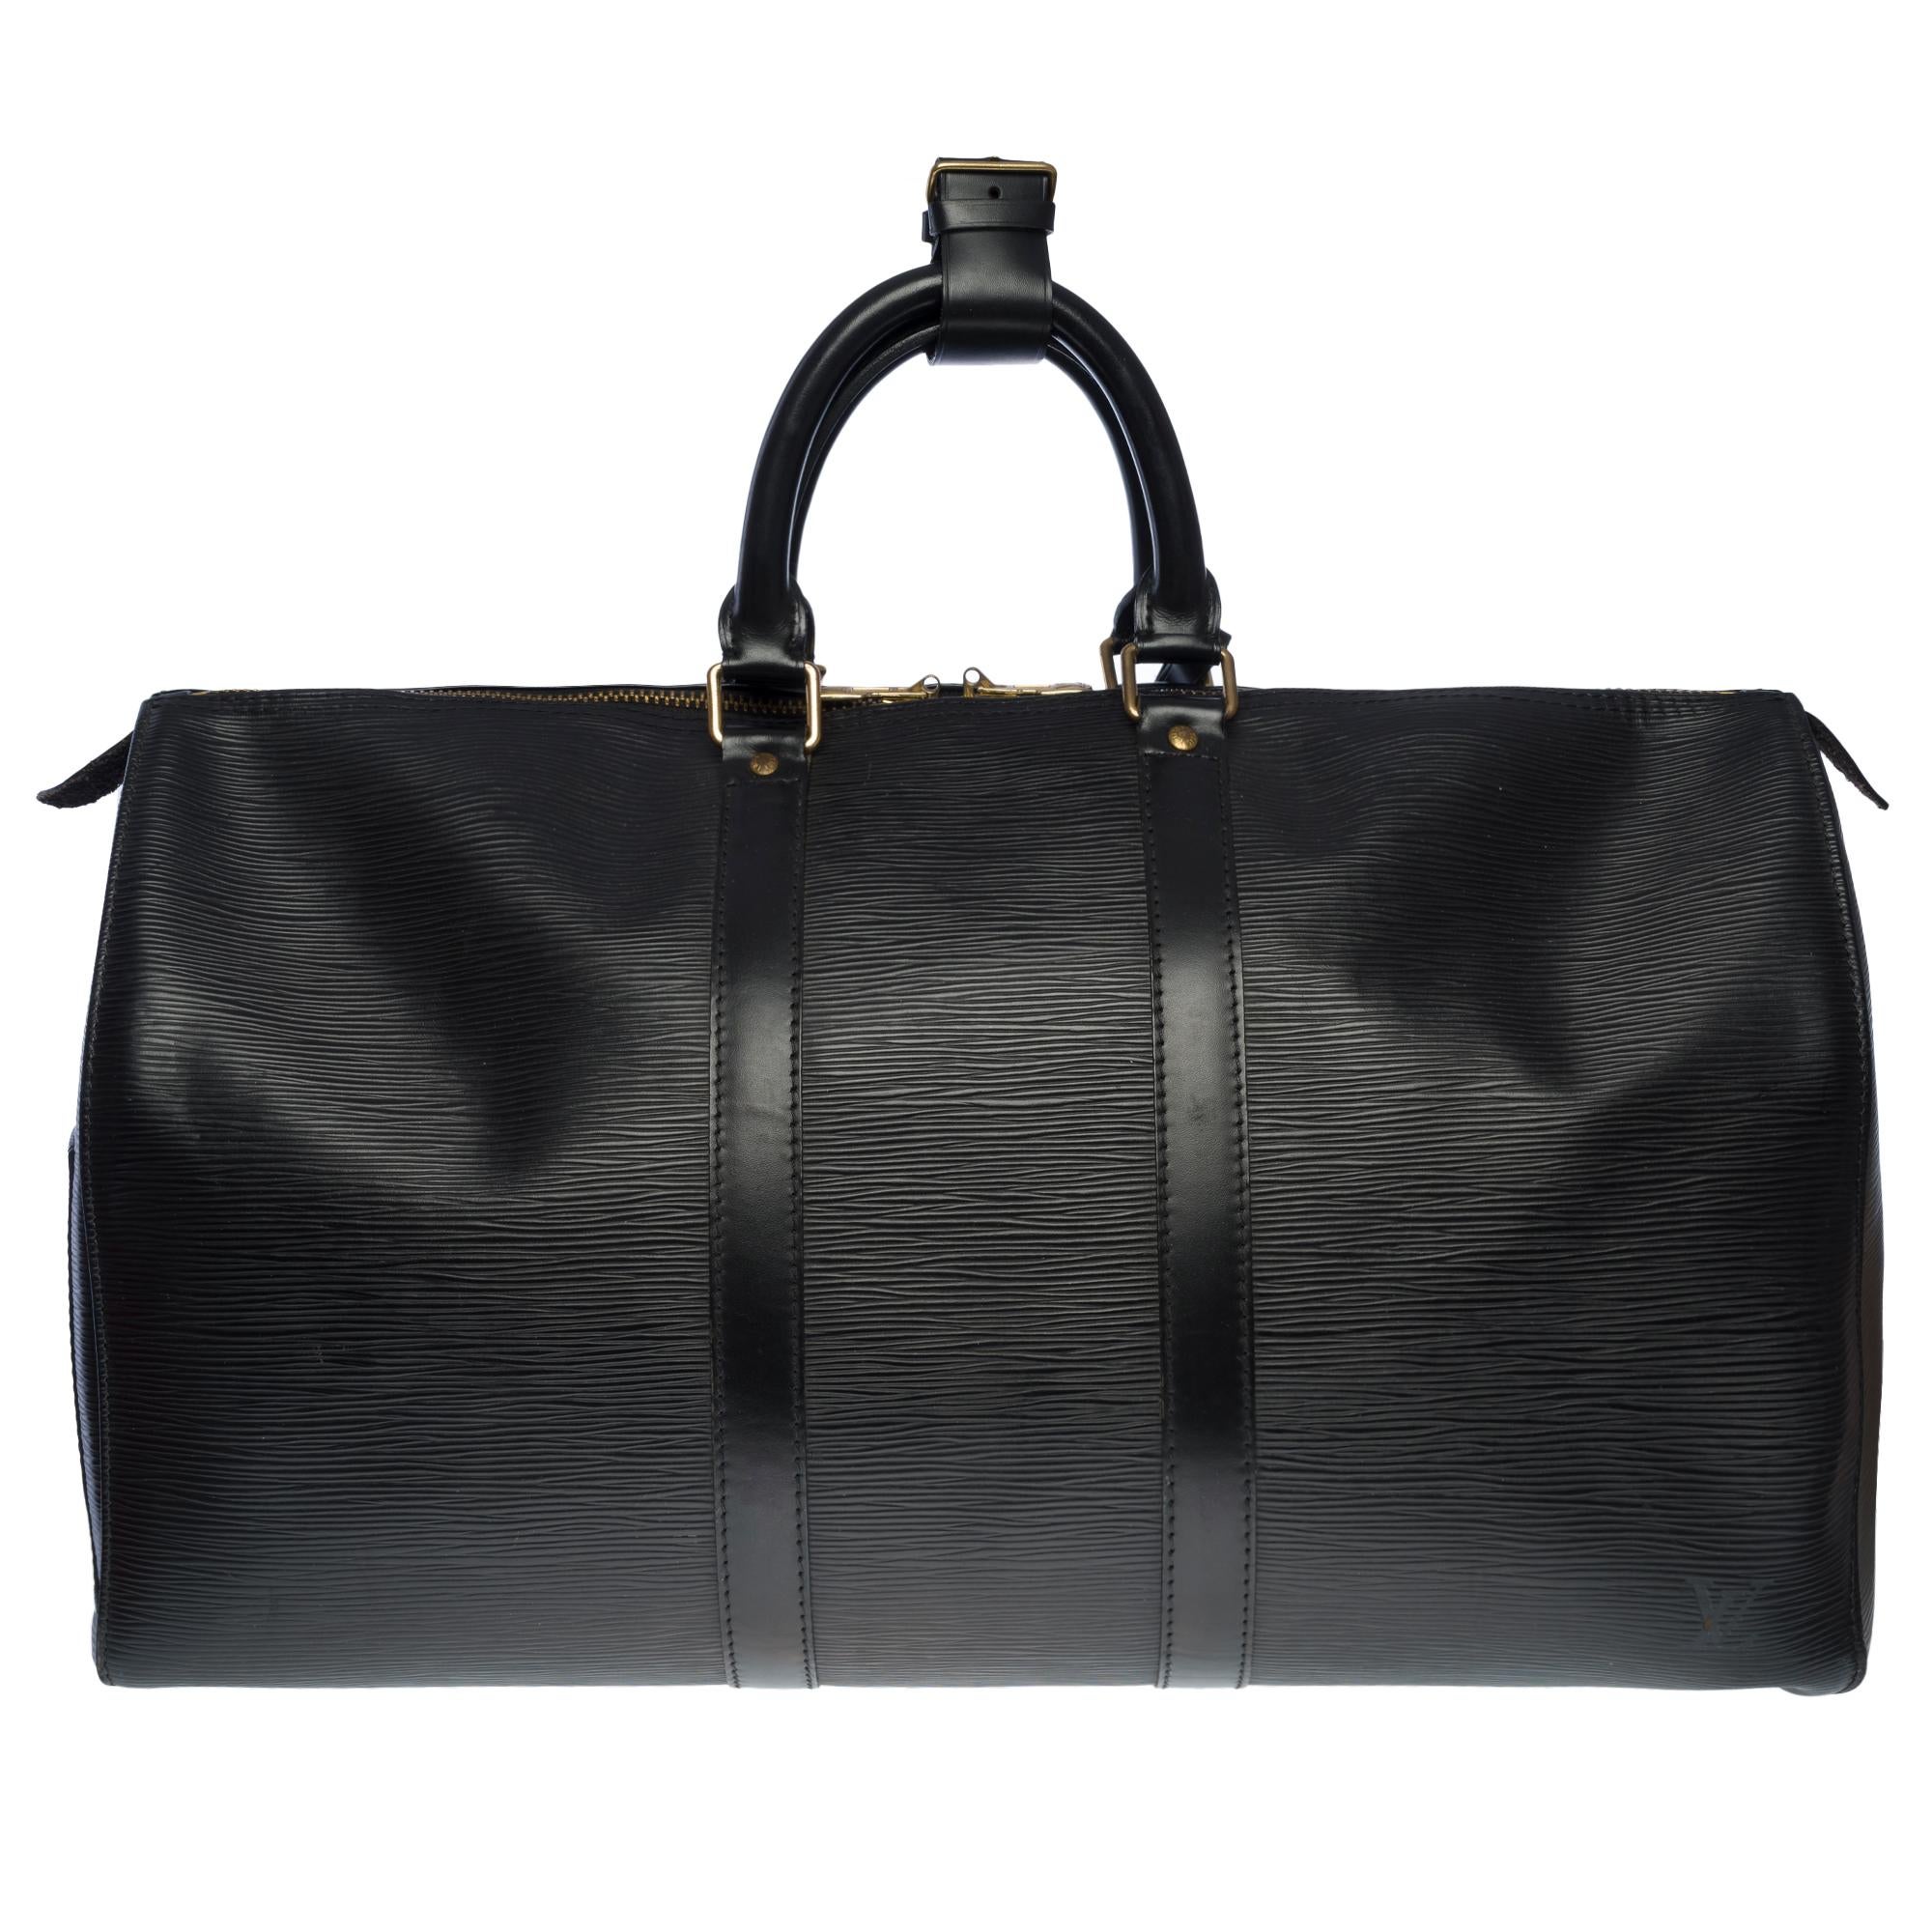 The very Classy Louis Vuitton Keepall 45 cm travel bag in black epi leather, double zipper sliders, double black leather handle for easy carrying
Zip
A left side patch pocket
Inner lining in black suede
Signature “LOUIS VUITTON, Made in